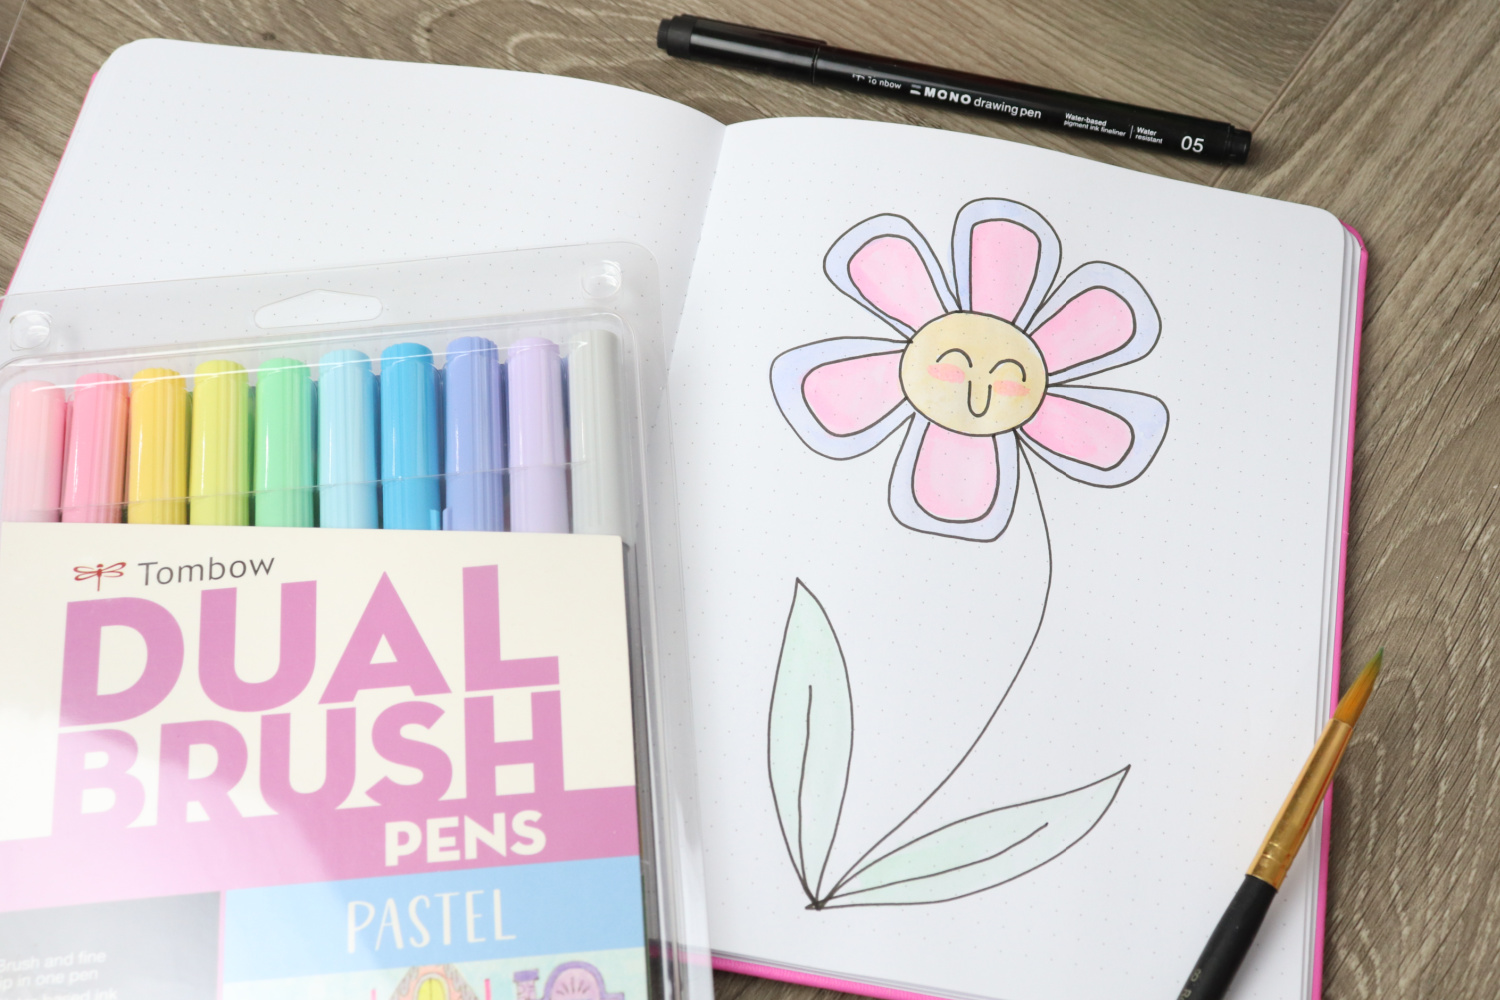 Image contains an open sketchbook on a wooden desk, with a large purple, pink, yellow, and green flower drawn on the page. A pack of pastel Dual Brush Pens, a paintbrush, and a MONO Drawing Pen sit nearby.